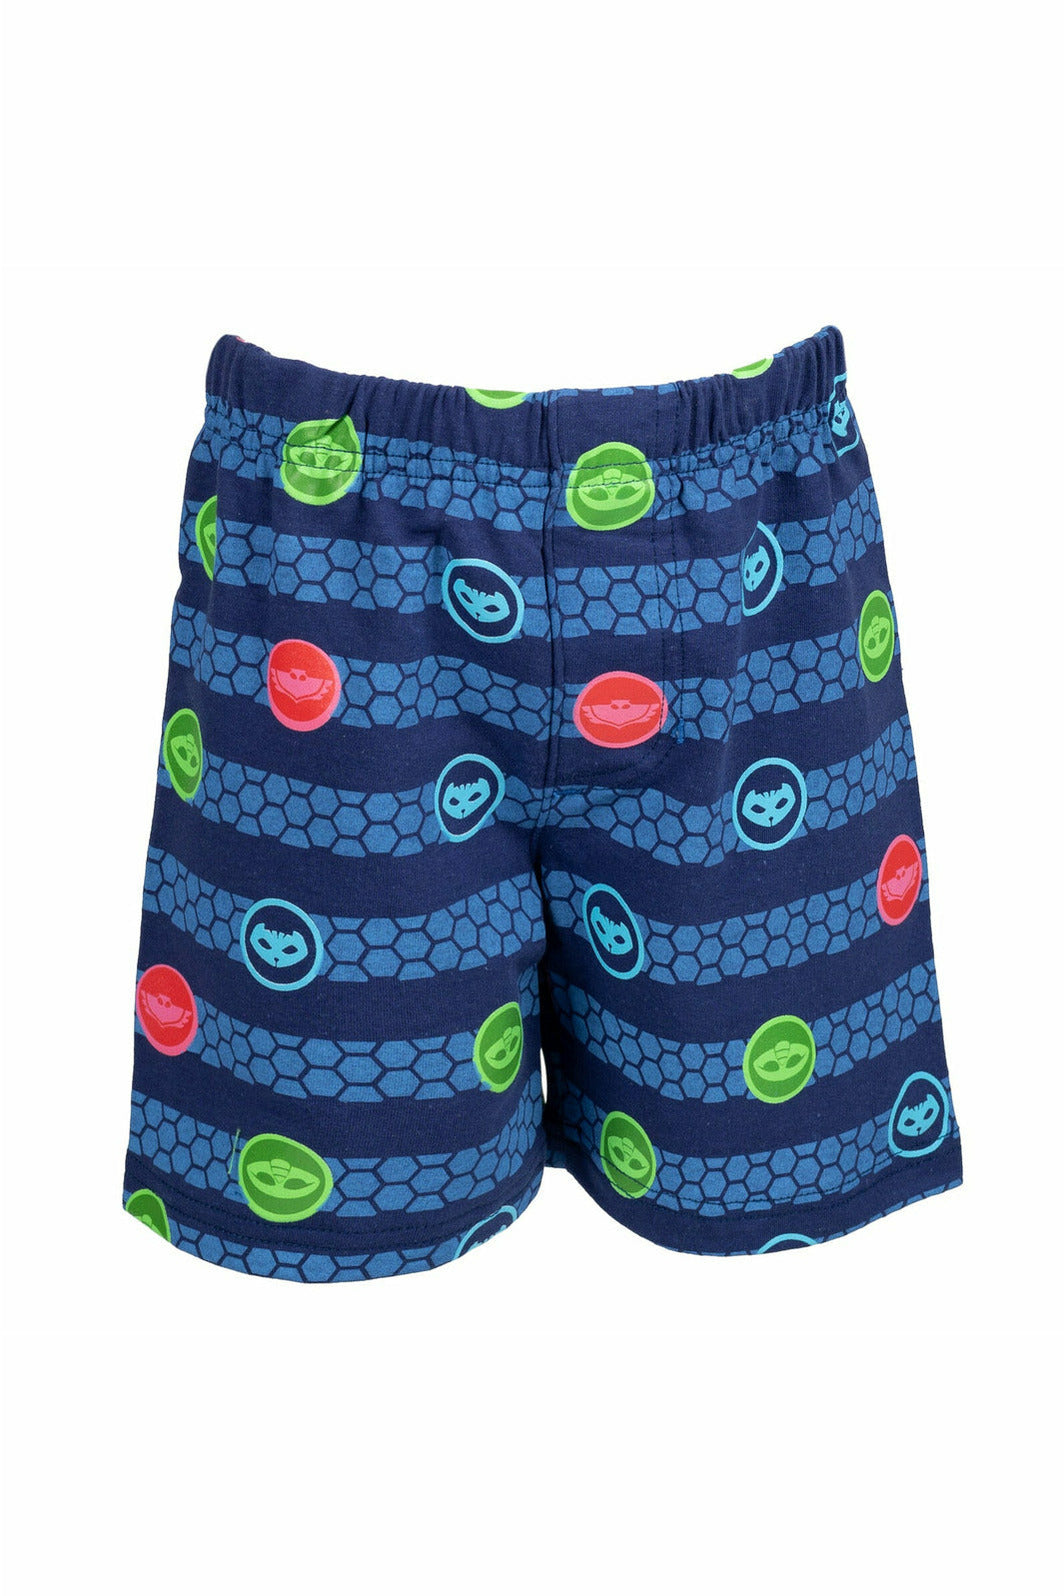 PJ Masks Graphic T-Shirt & French Terry Shorts